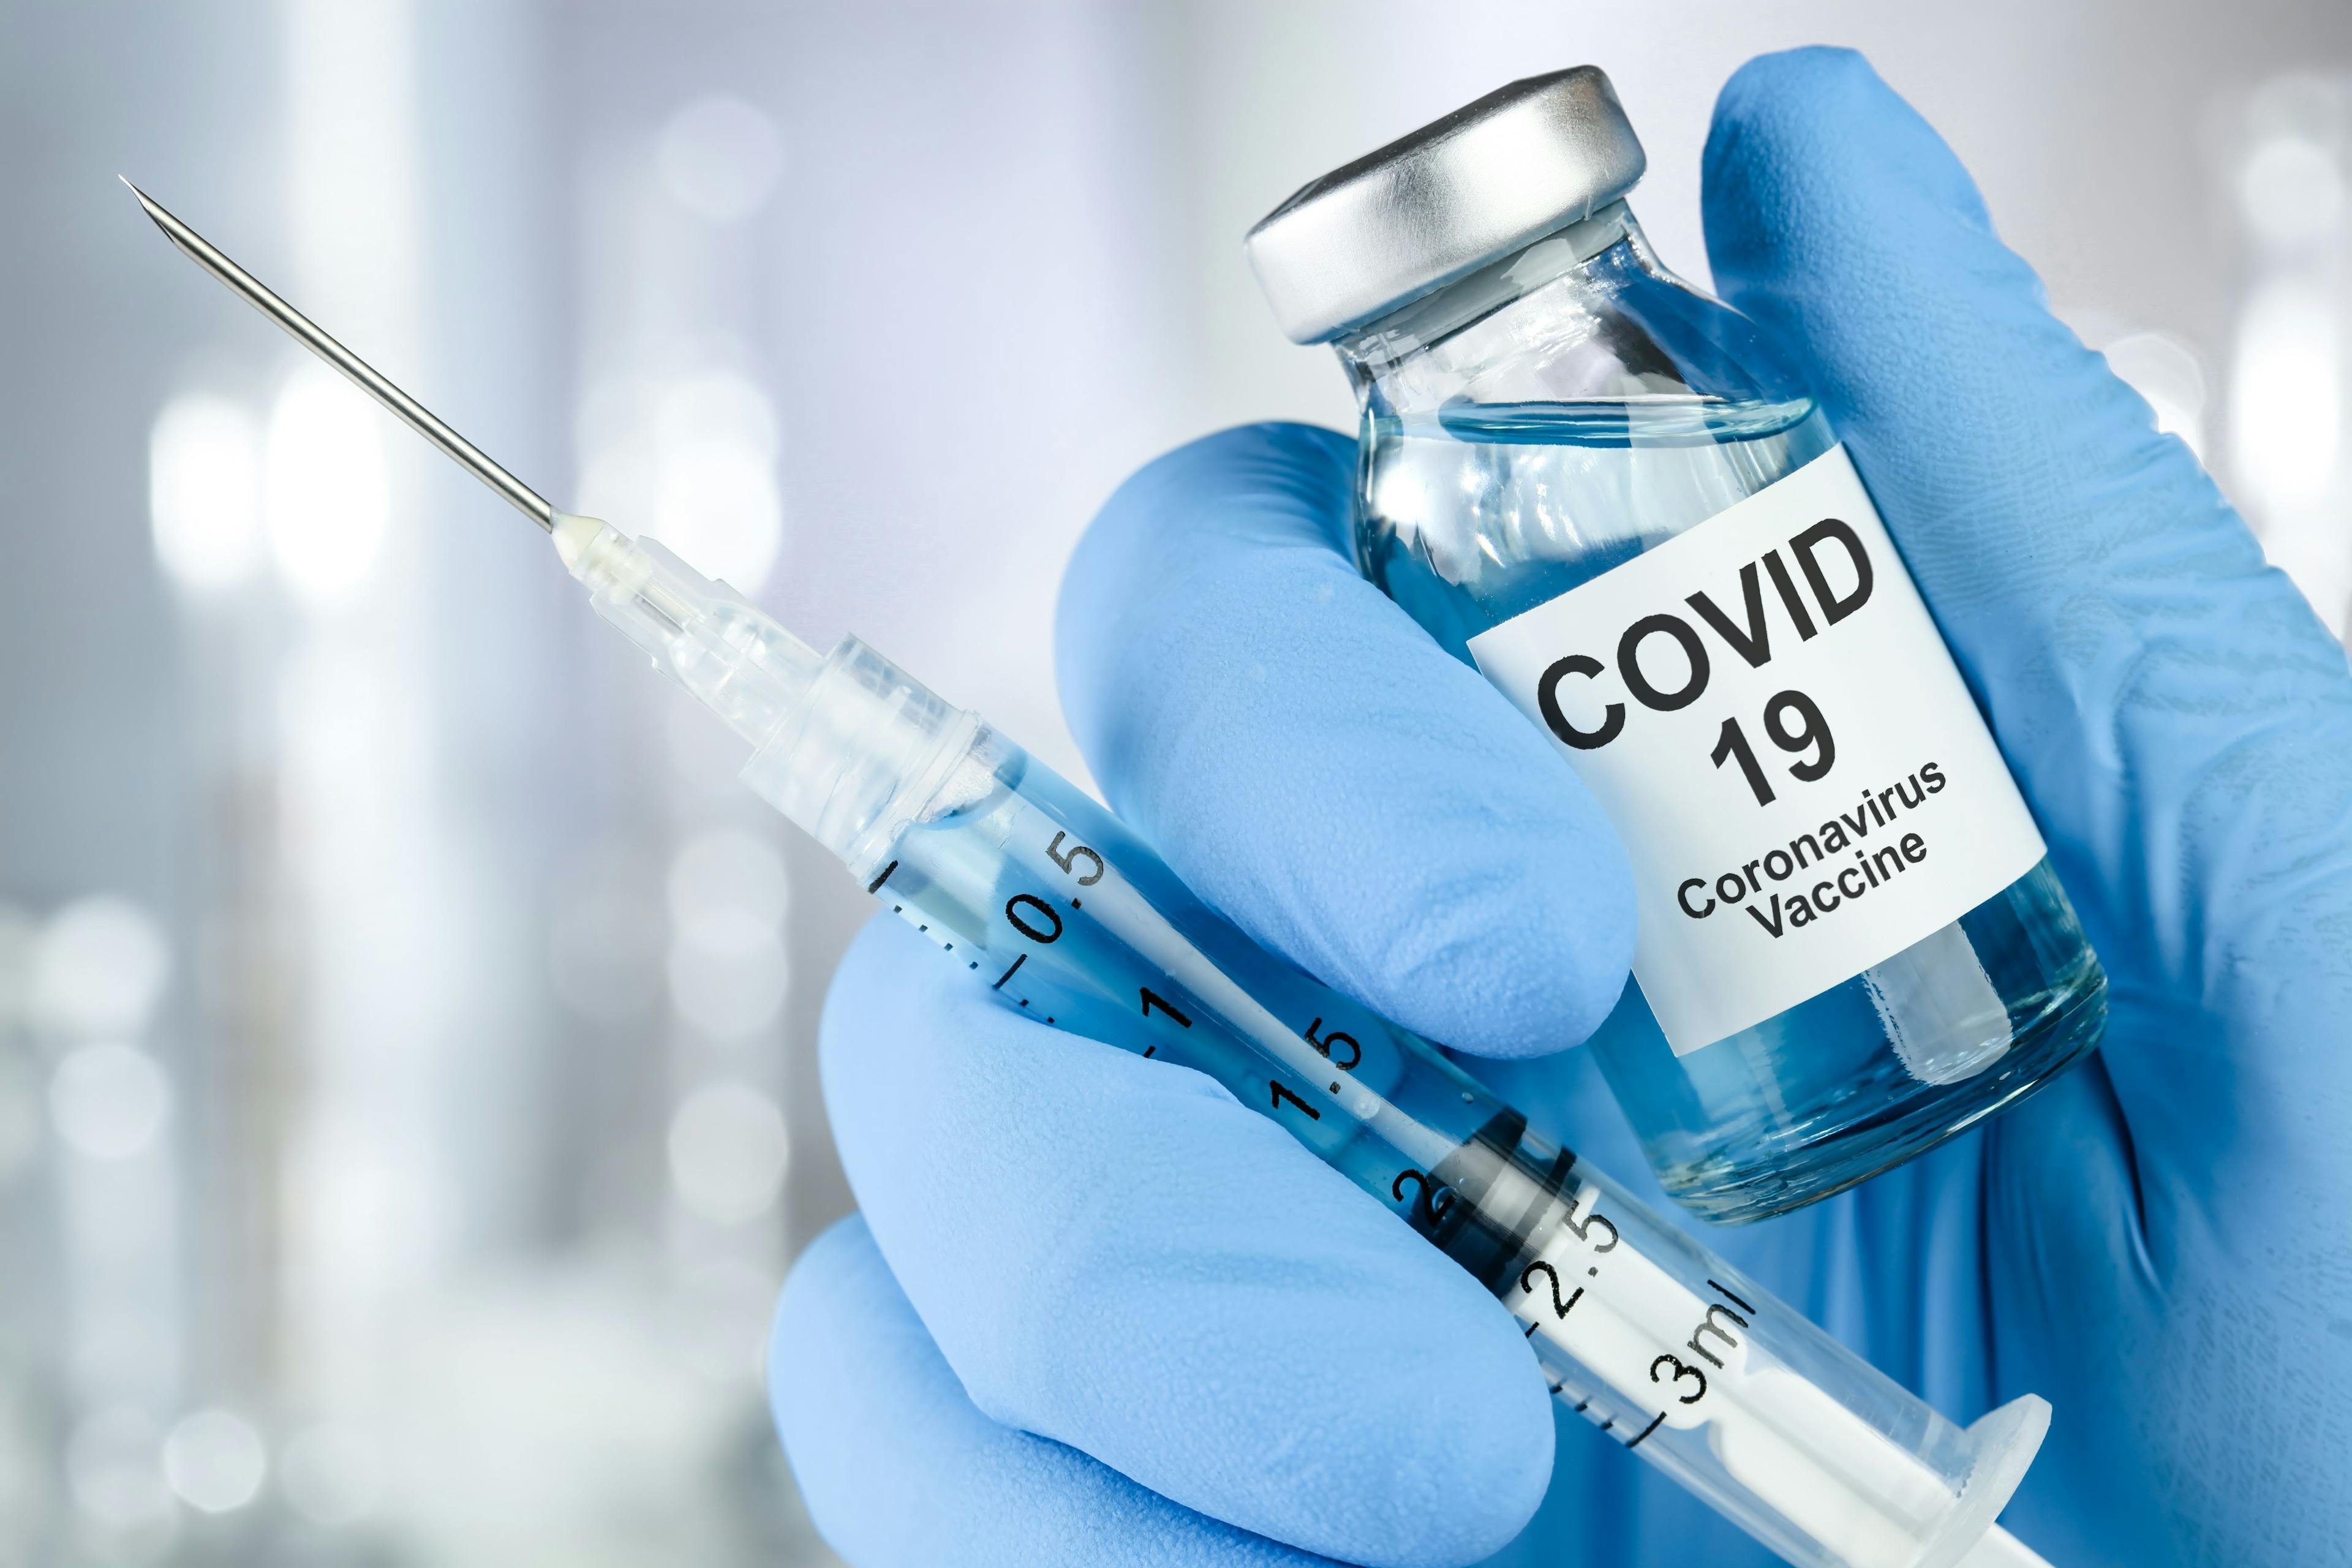 Bivalent COVID-19 booster safety profile consistent with monovalent vaccine